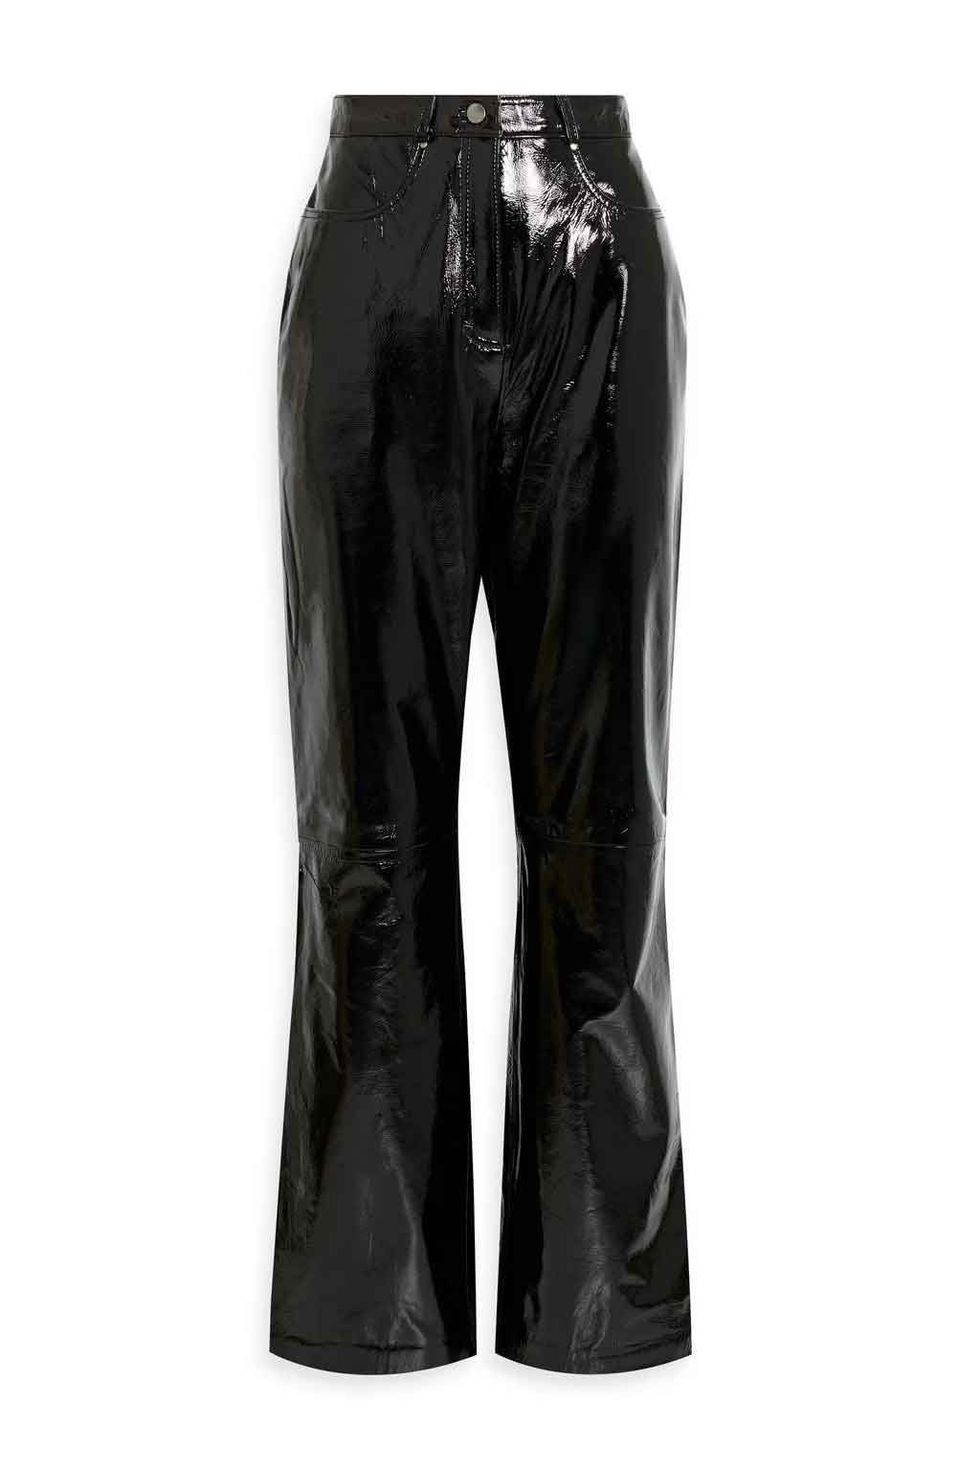 Muubaa High Rise Slim Fit Bootcut Leather Trousers in Black for Men